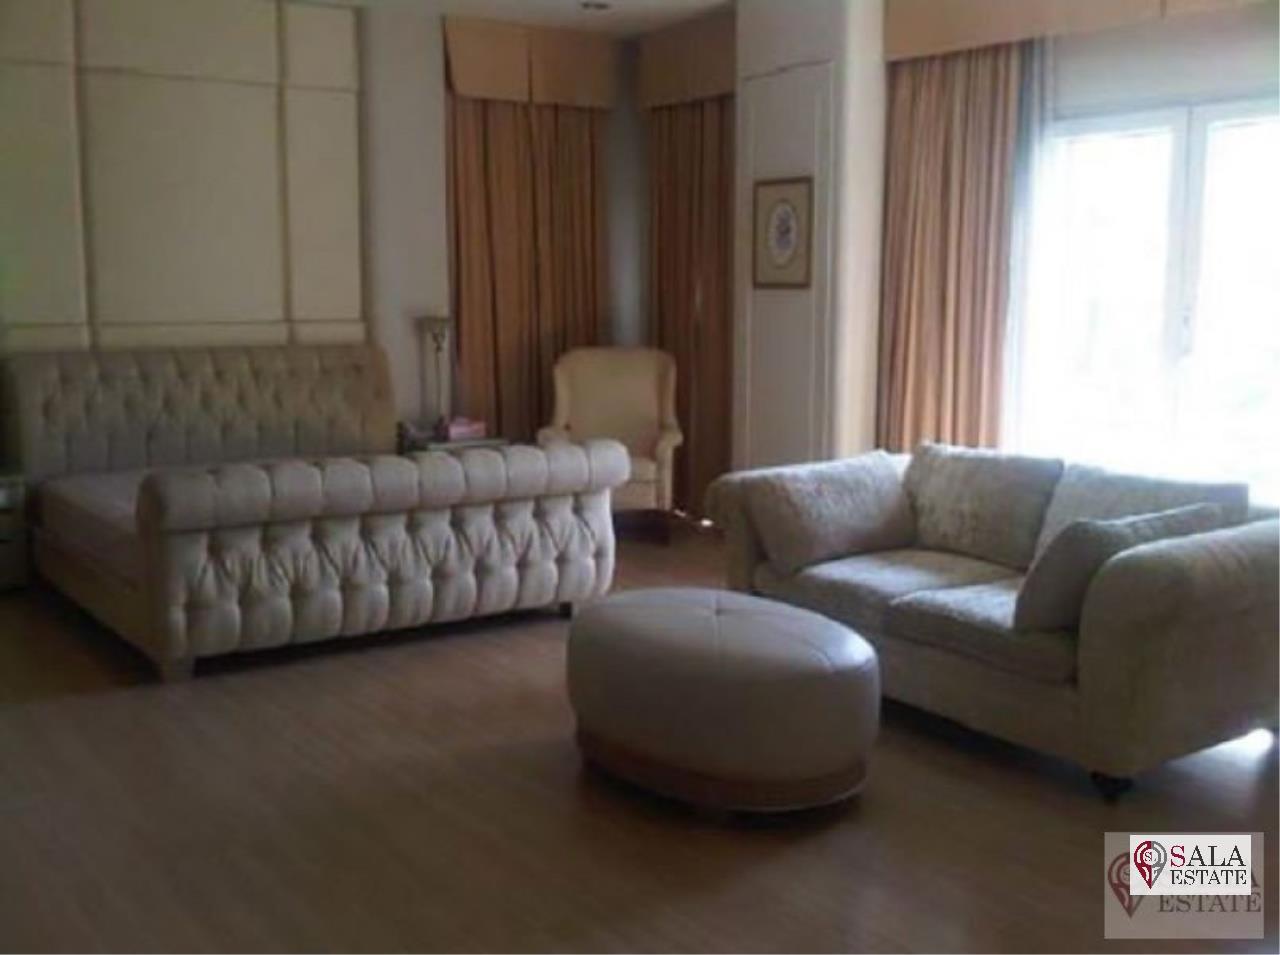 SALA ESTATE Agency's ( FOR RENT / SALE ) LUXURY PRIVATE HOUSE - LAKEWOOD , 3 BEDROOMS 4 BATHROOMS , FULLY FURNISHED 6